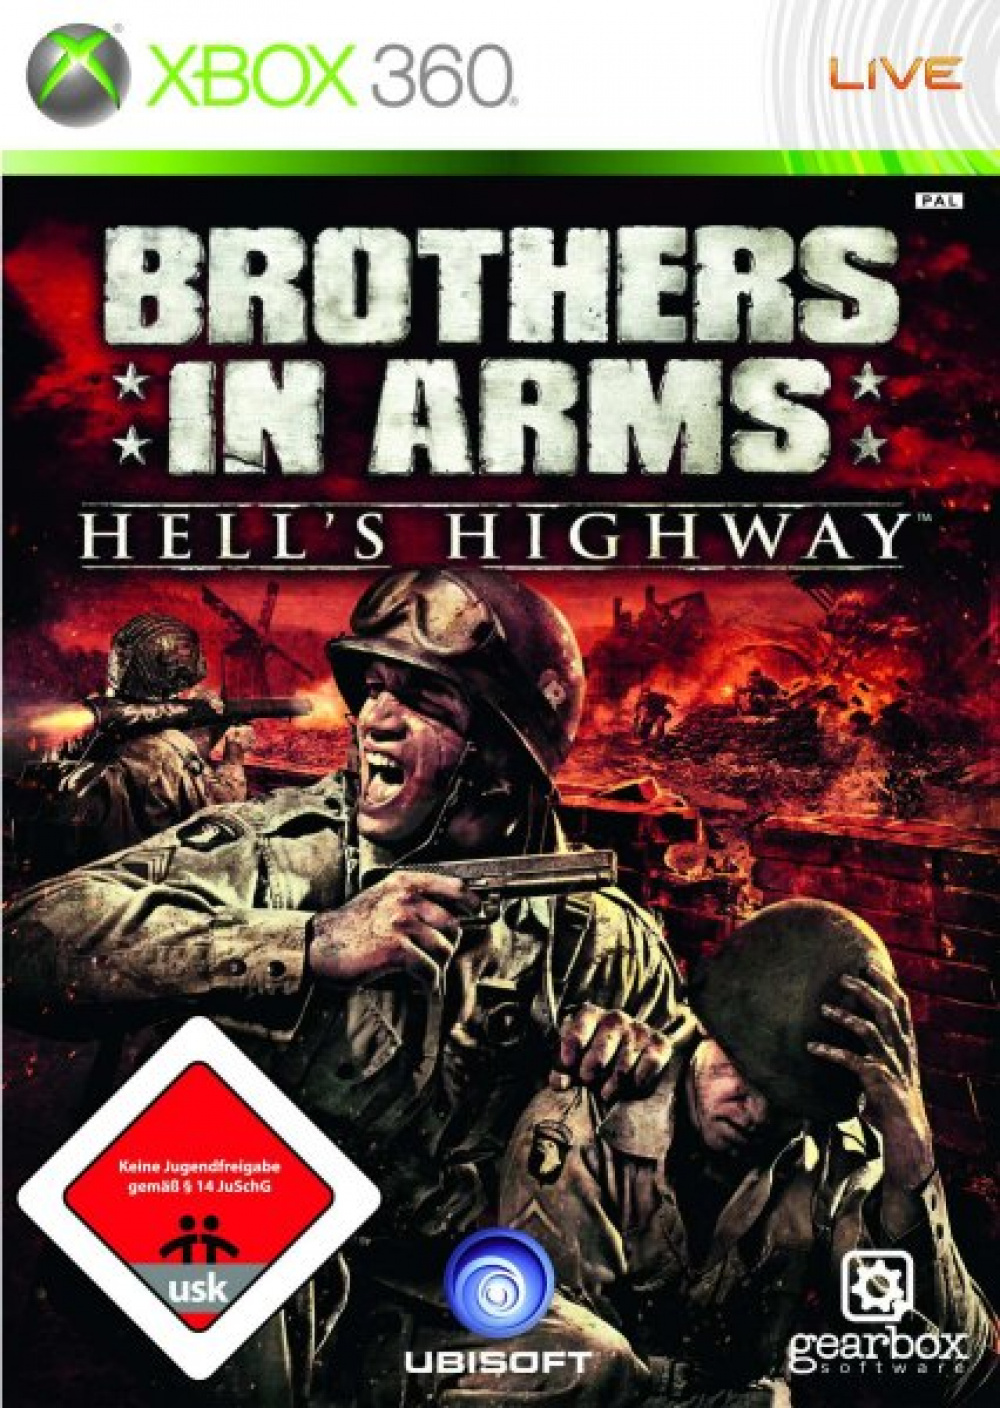 what order did brothers in arms pc game come out